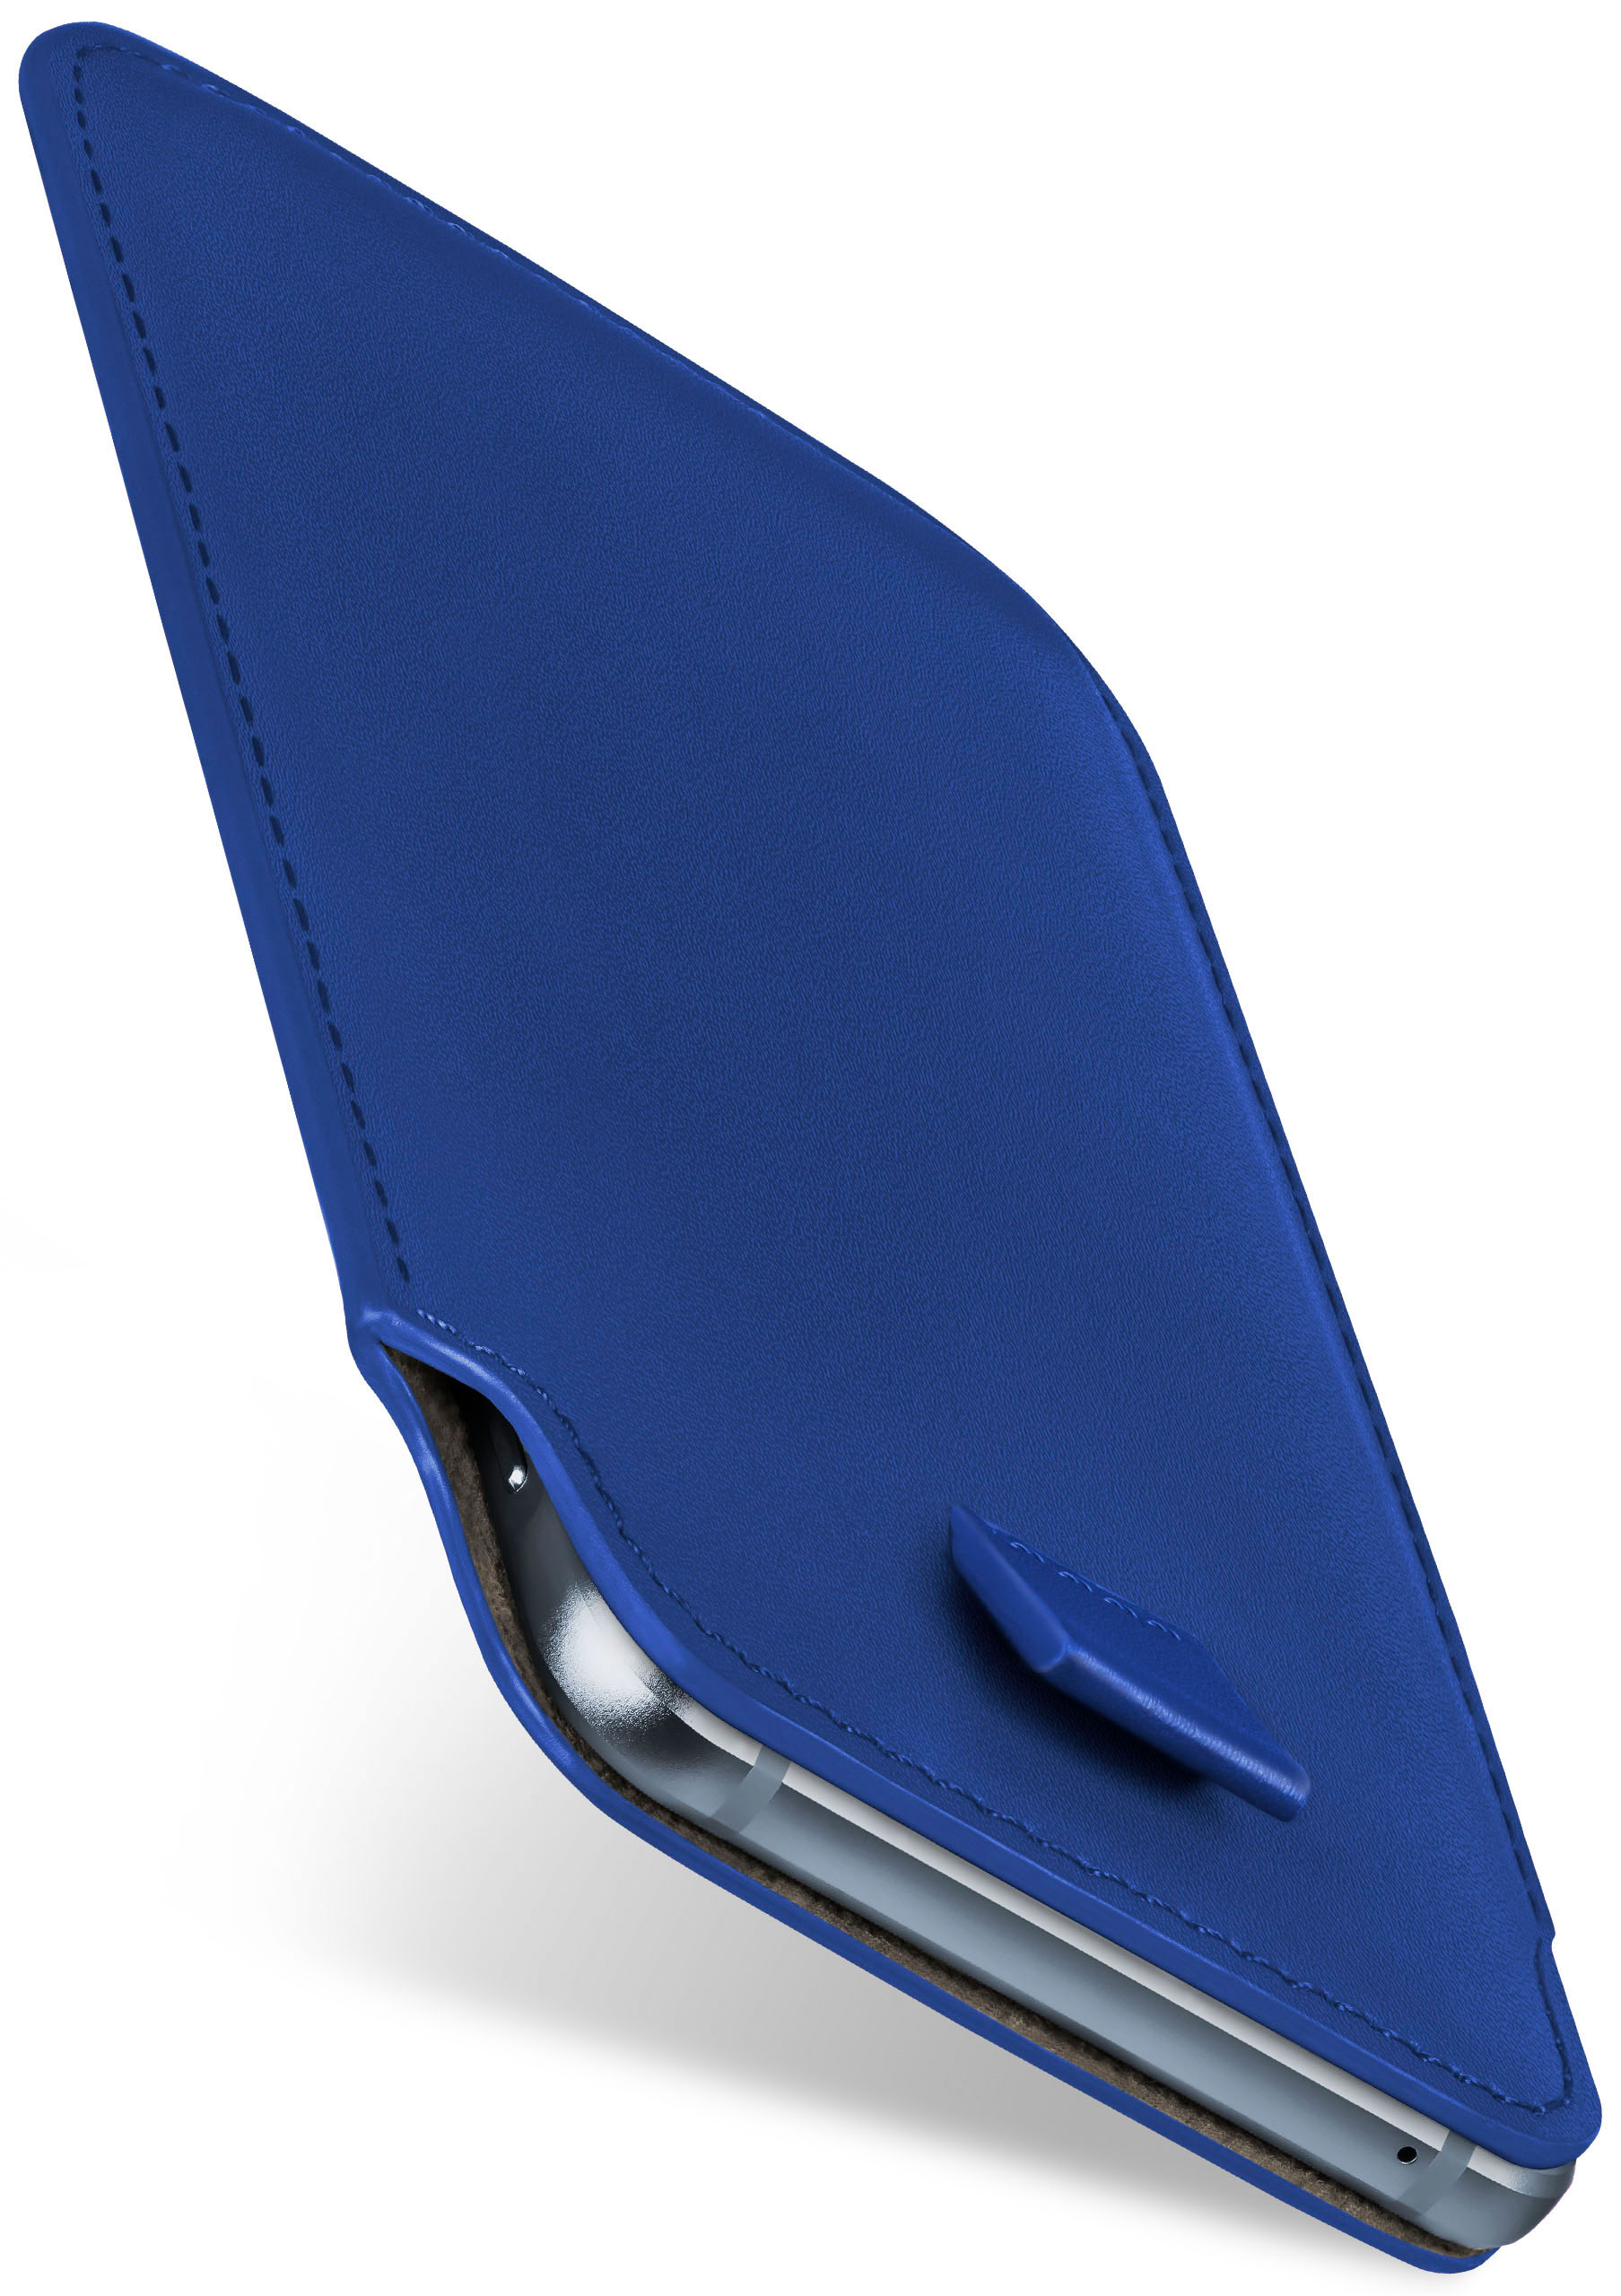 Royal-Blue Full MOEX Pro, Slide Case, View2 Cover, Wiko,